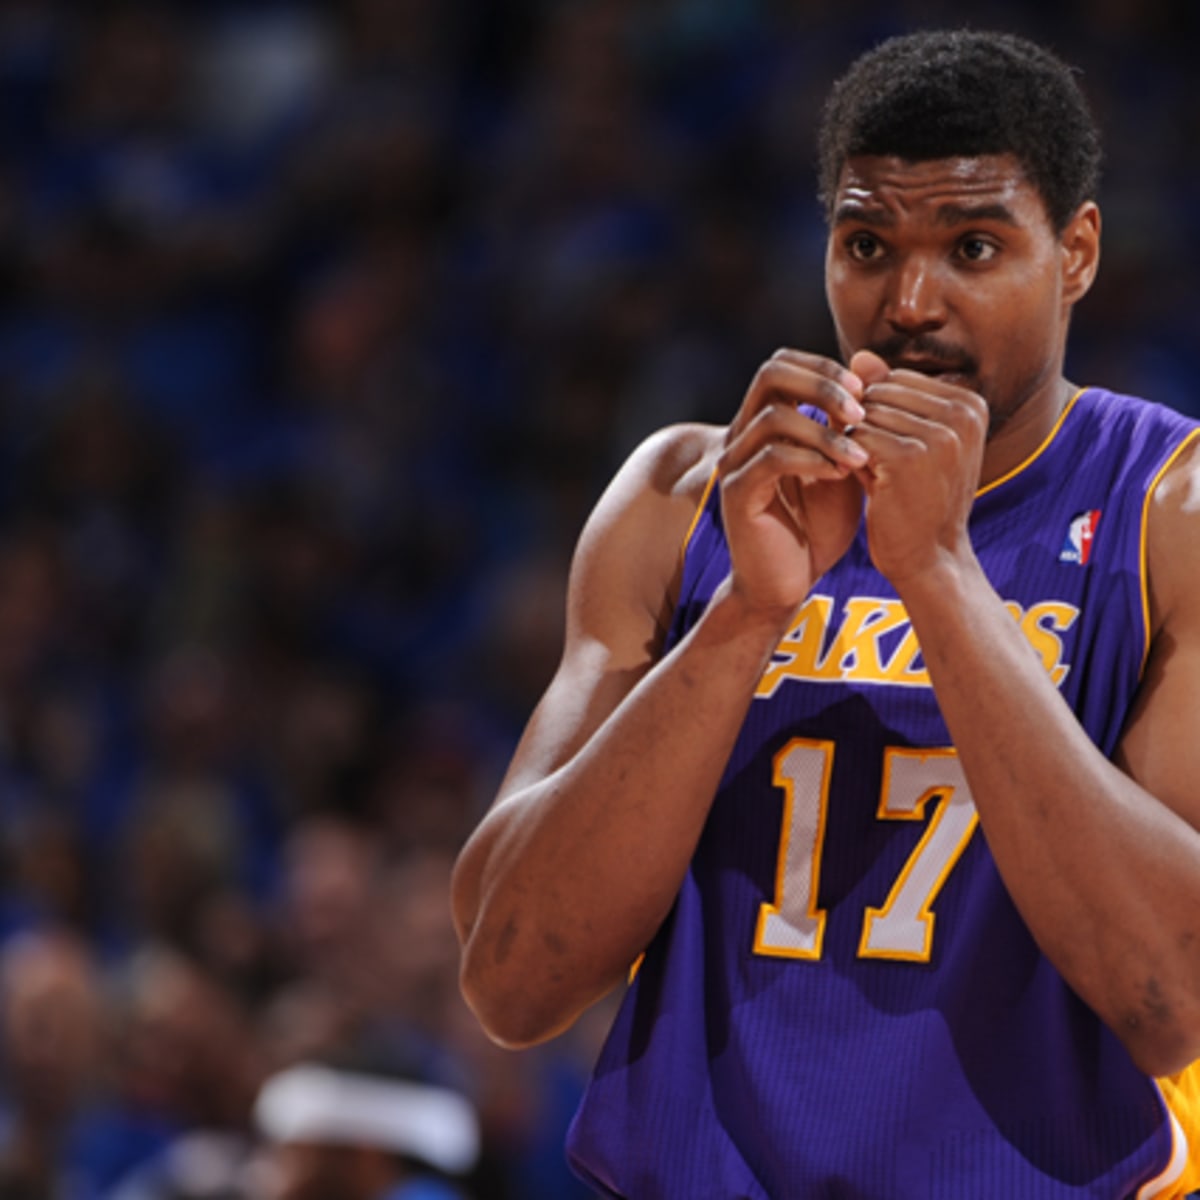 Agent admits Andrew Bynum needs to lose 'about 15 pounds' after